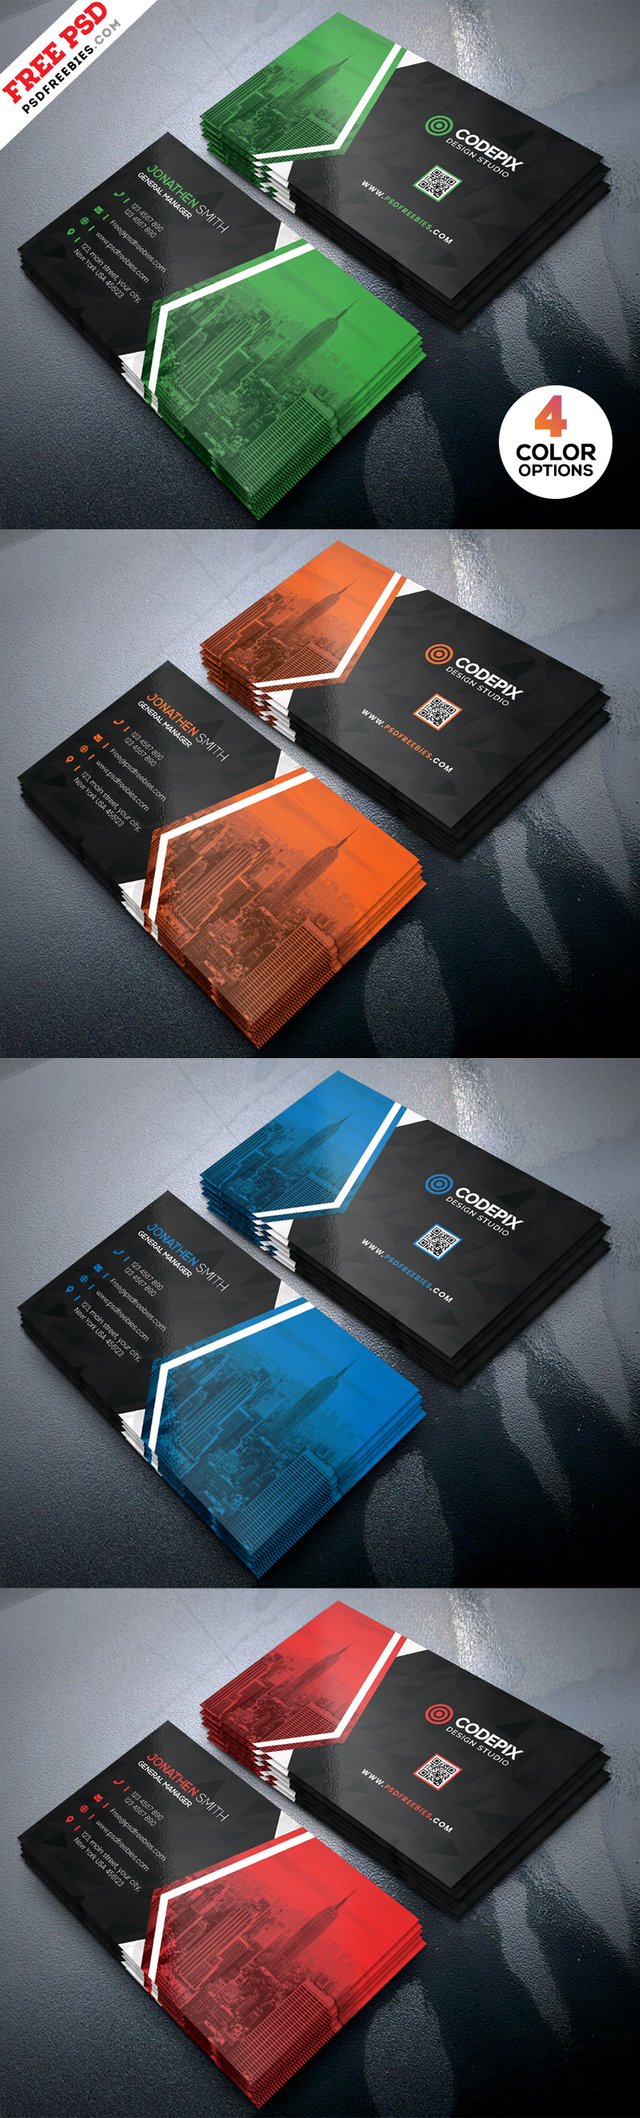 Creative-Business-Cards-Design-Free-PSD-Preview.jpg